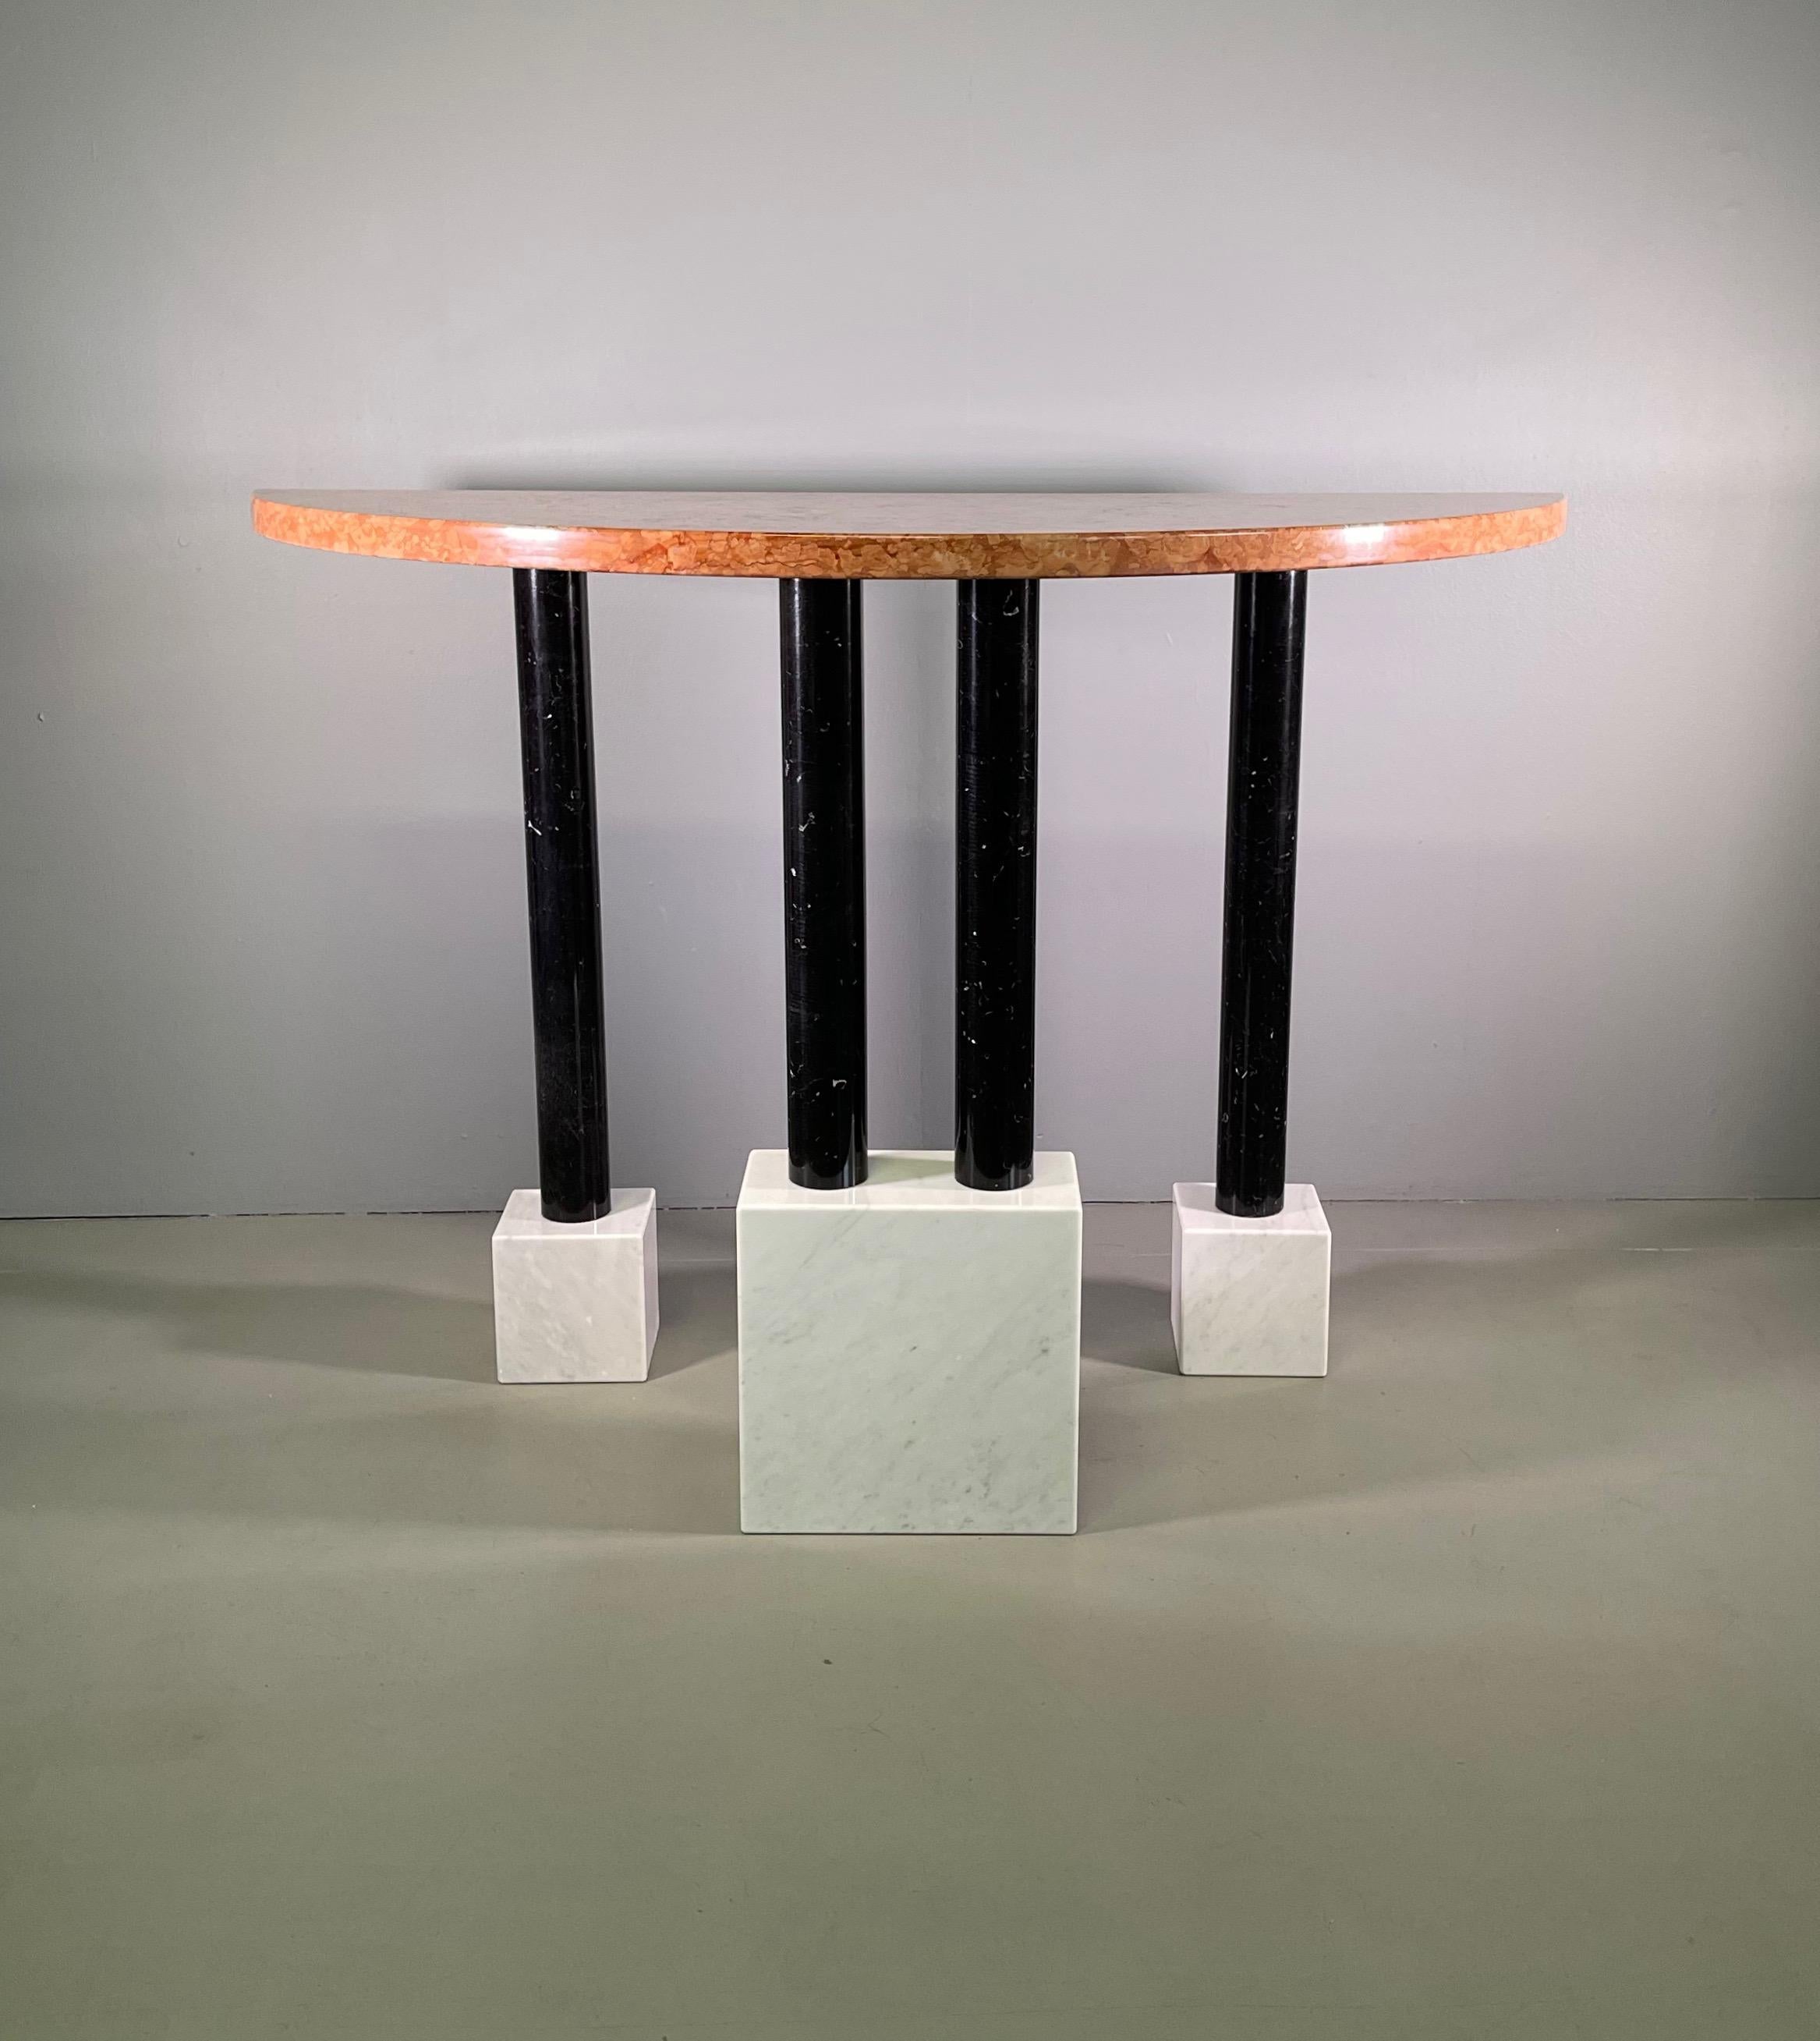 Vintage console marble Ettore sottsass for Ultima Edizione Italy, 1980s.